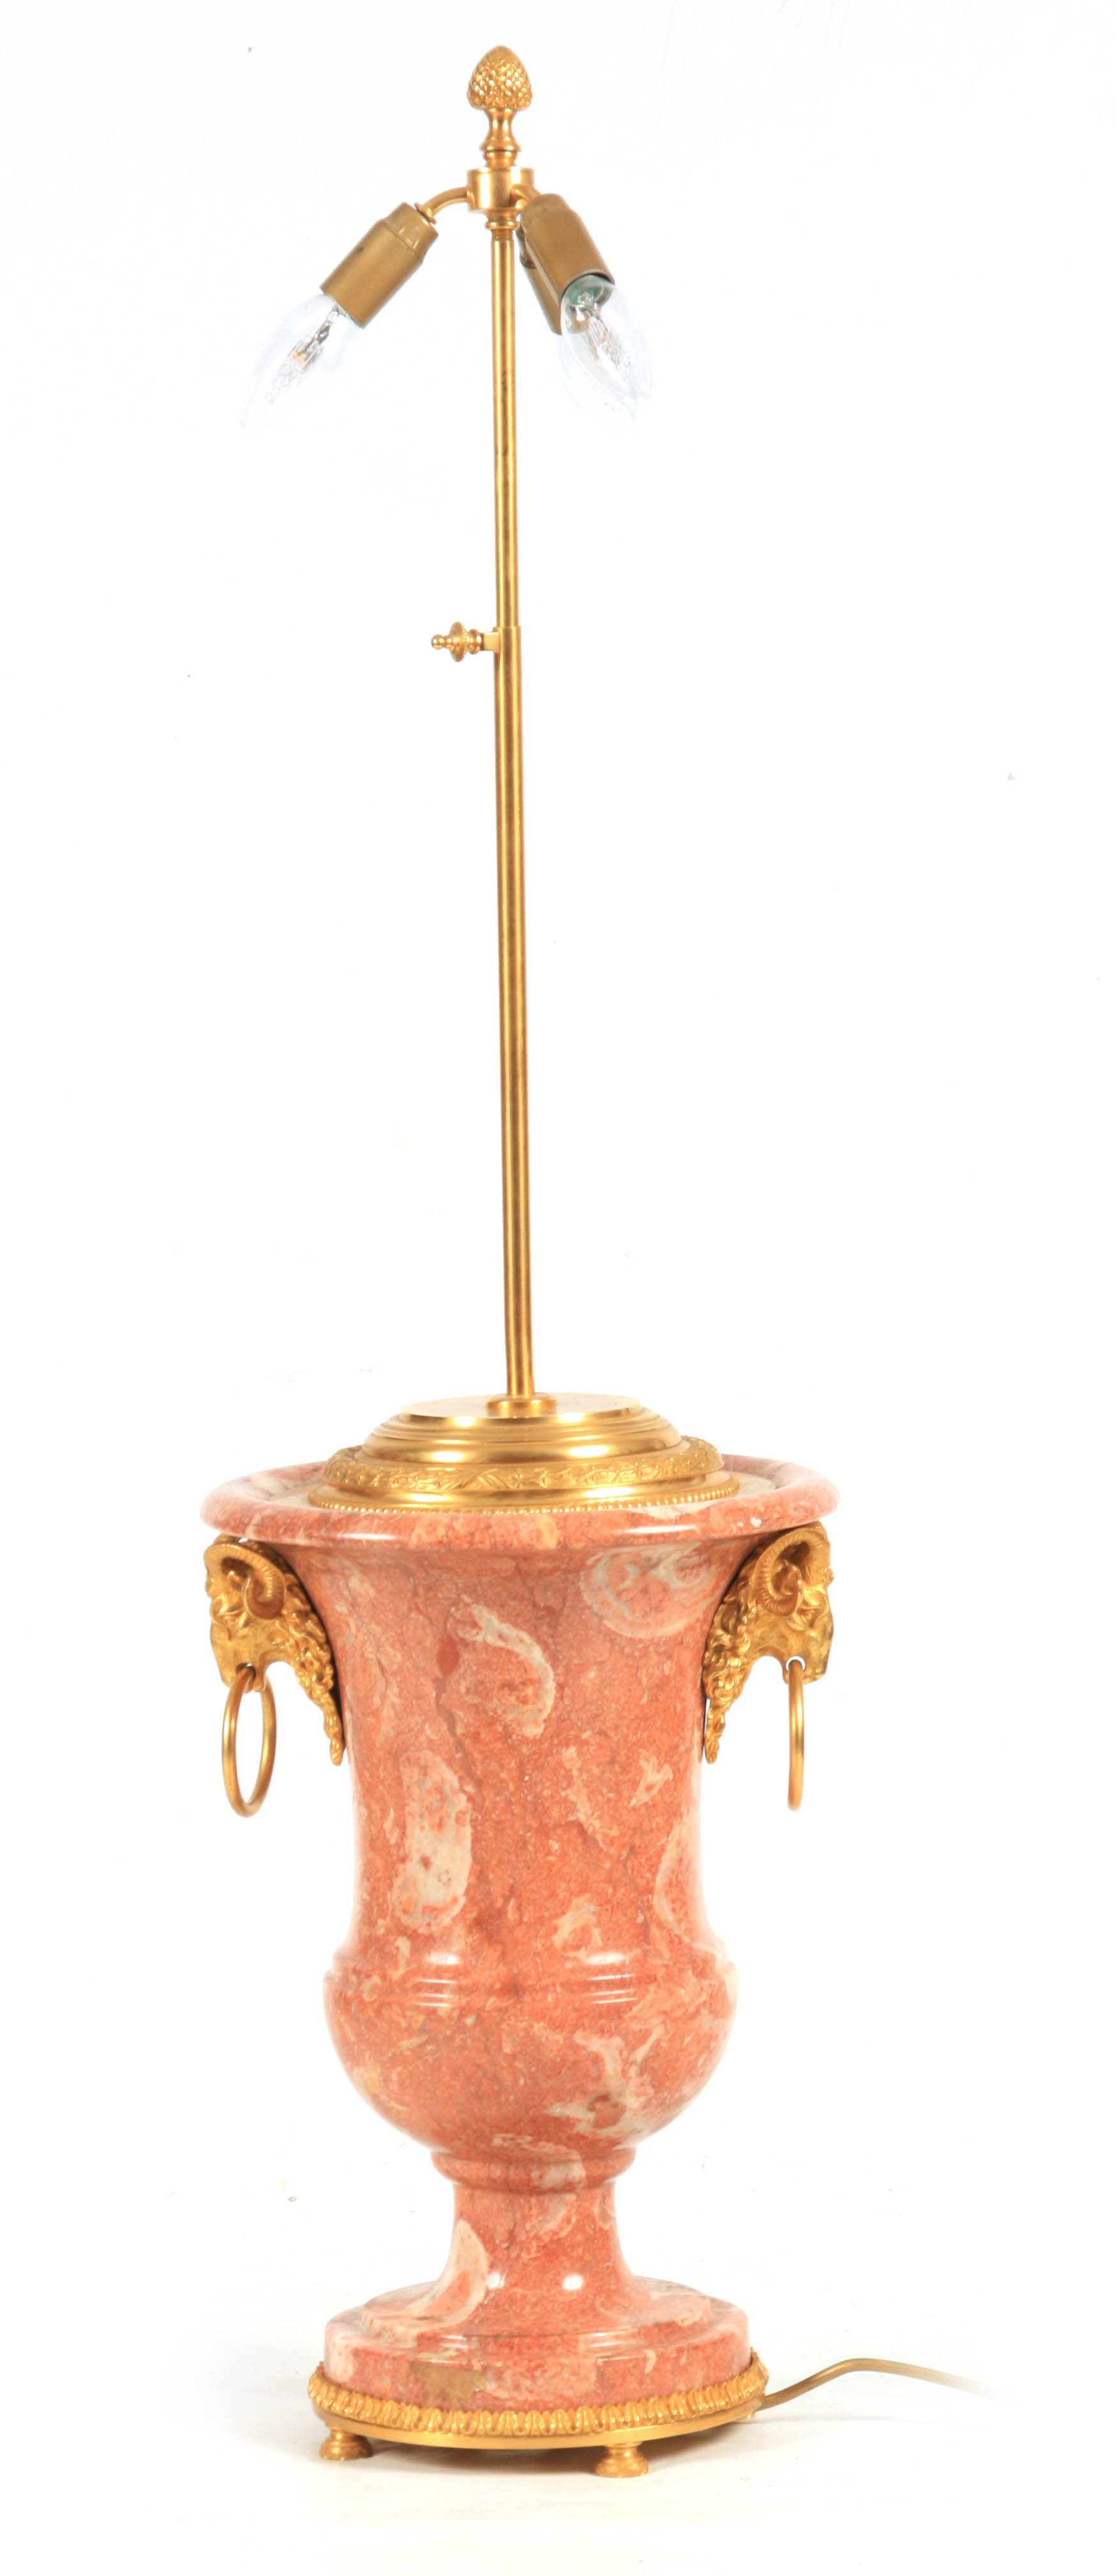 A 20TH CENTURY FRENCH MARBLE AND GILT BRASS TABLE LAMP with urn-shaped body and rams head side